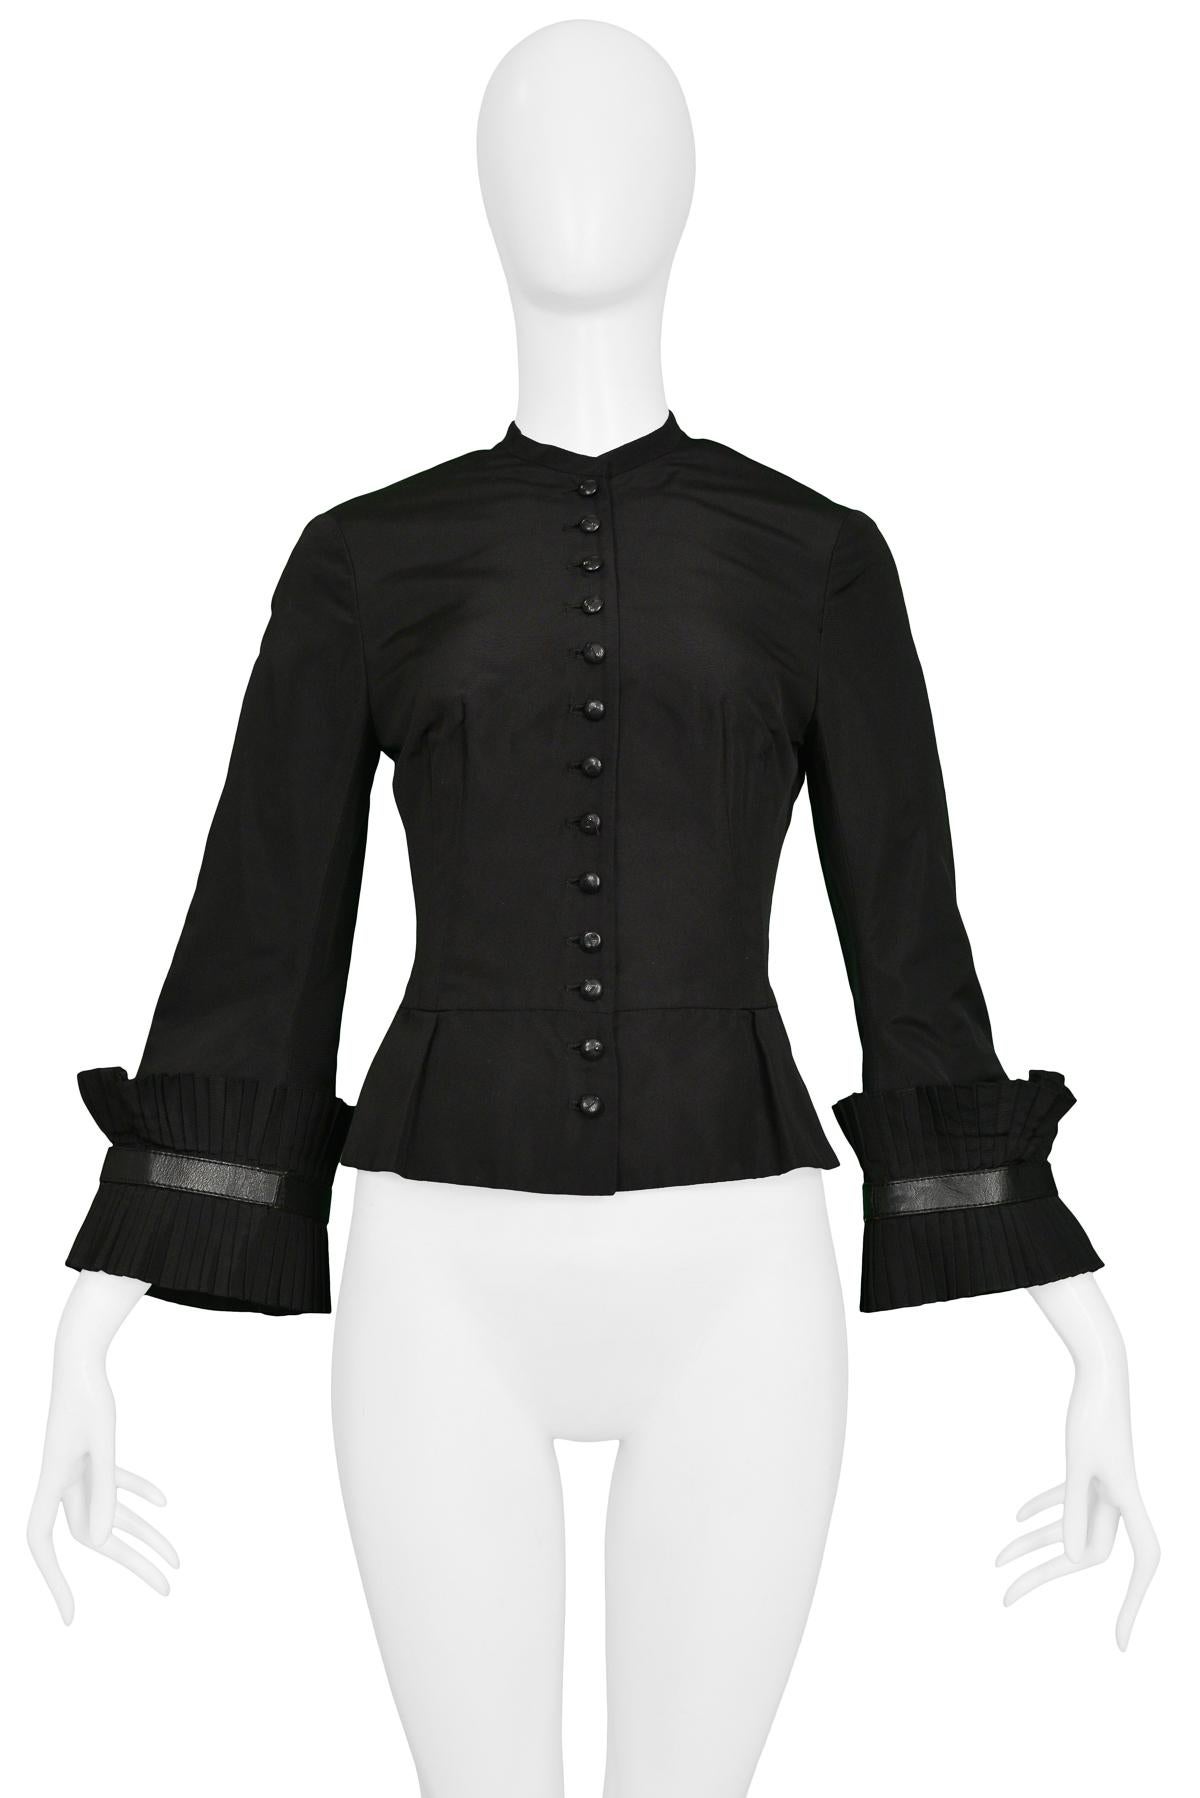 Resurrection Vintage is excited to offer an Alexander McQueen black taffeta jacket featuring pleated flared sleeves, a short peplum, and a button closure at the front.  from the Autumn/Winter 2002 “SUPERCALIFRAGILISTICEXPIALADOCIOUS” Runway